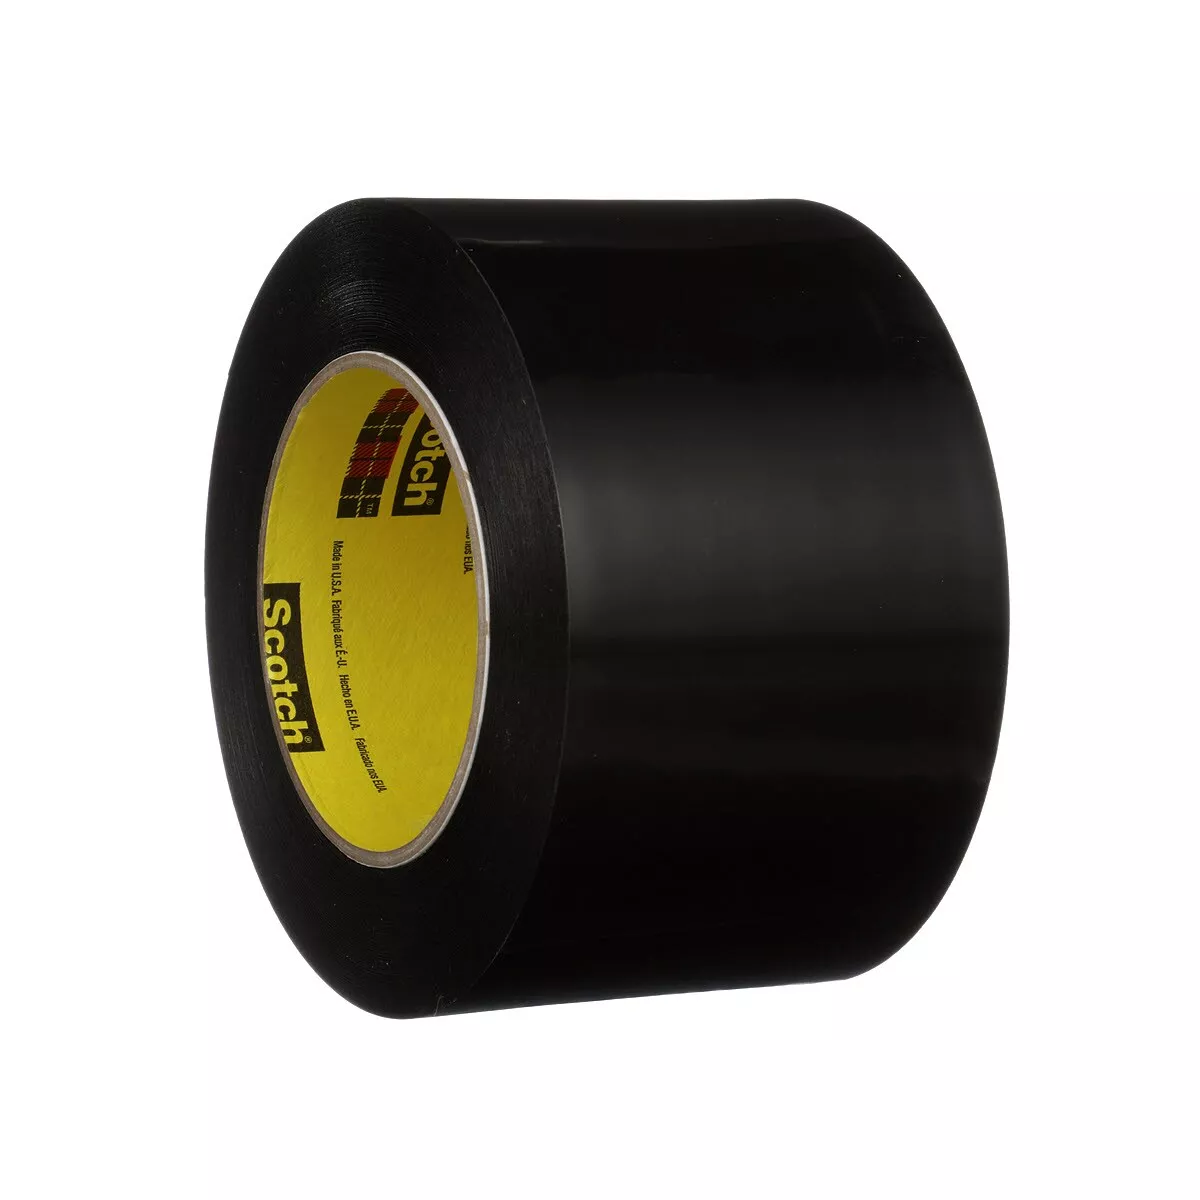 3M™ Preservation Sealing Tape 481, Black, 3 in x 36 yd, 9.5 mil, 12
Roll/Case